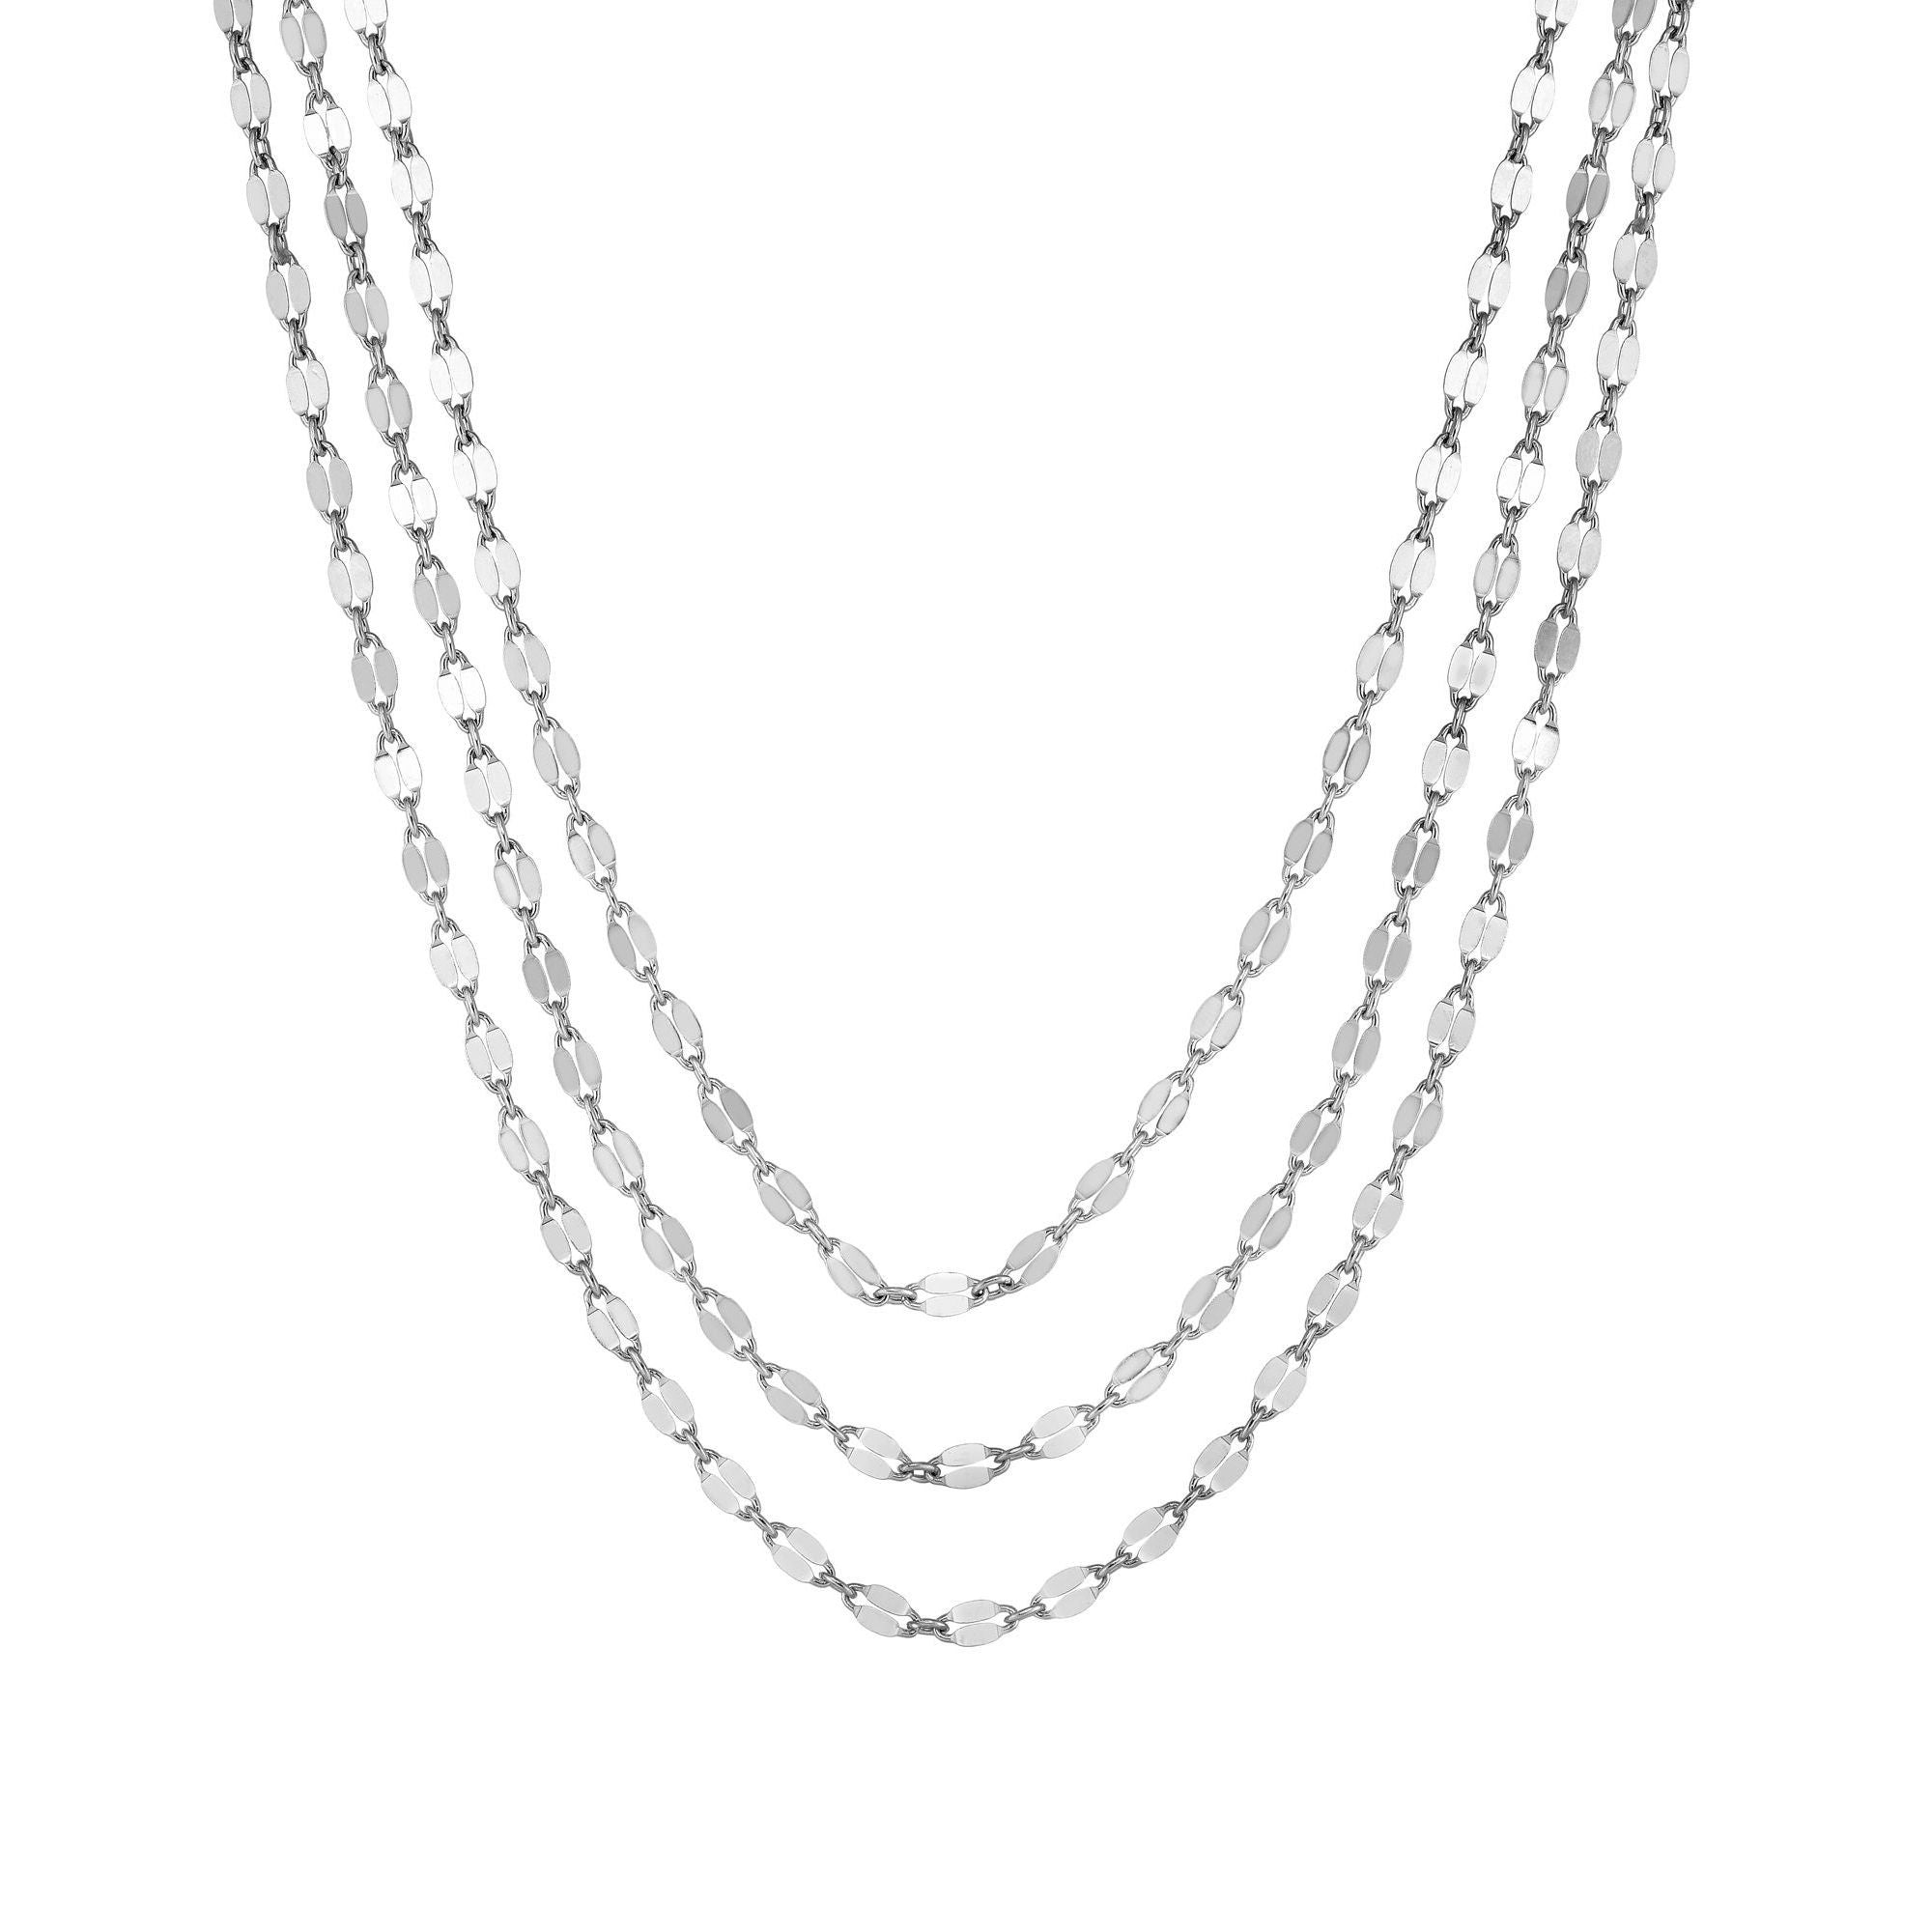 Sterling Silver Triple Chain Choker Necklace, 16" fine designer jewelry for men and women